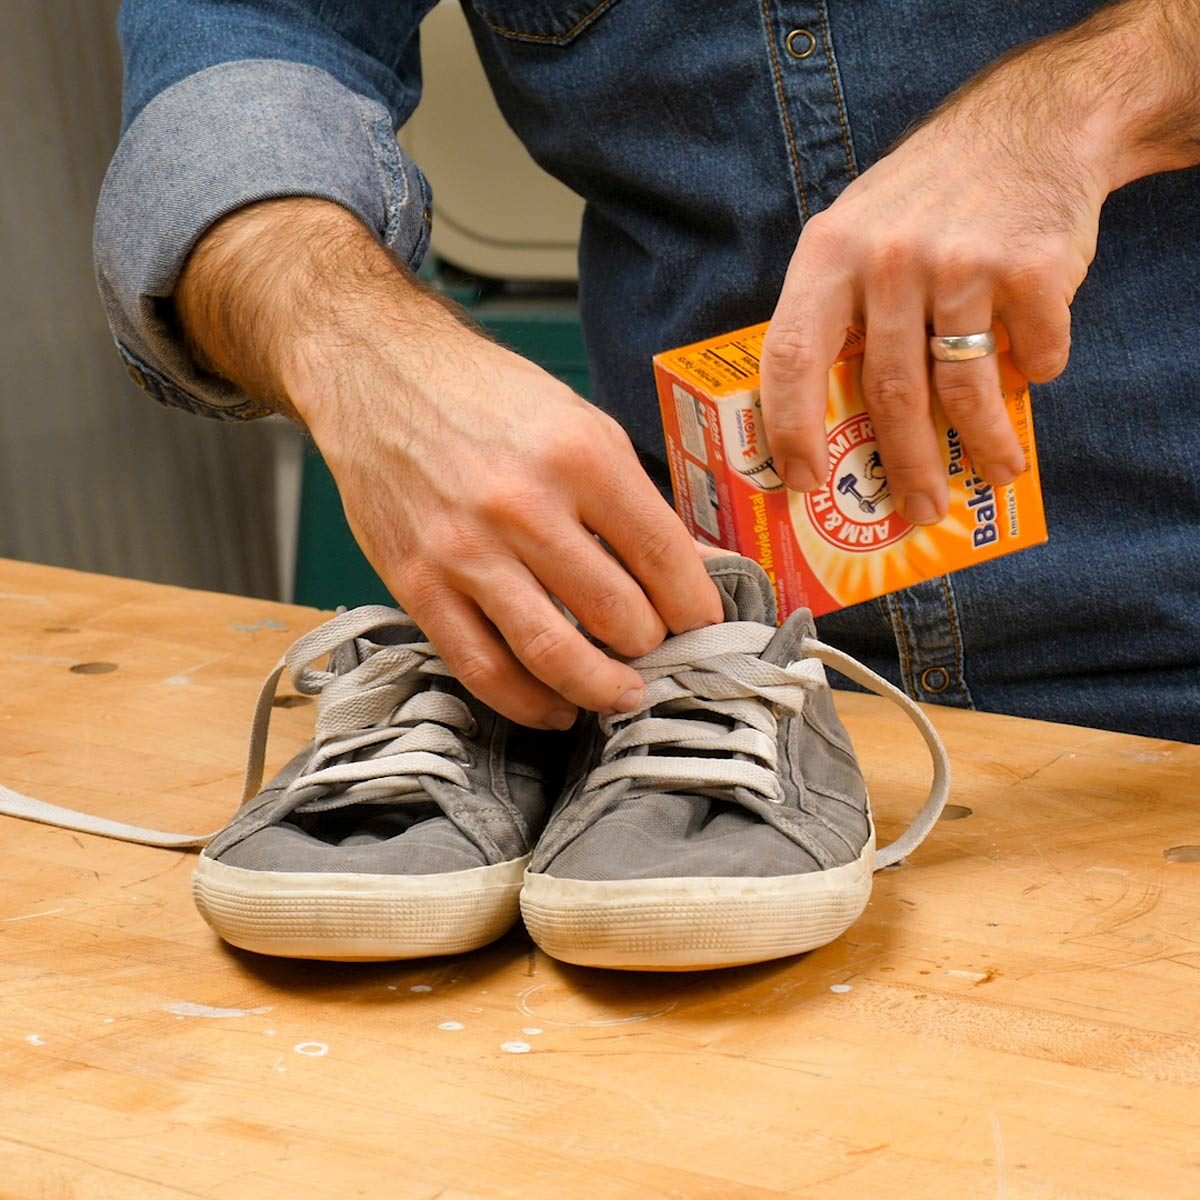 how to use baking soda for cleaning shoes